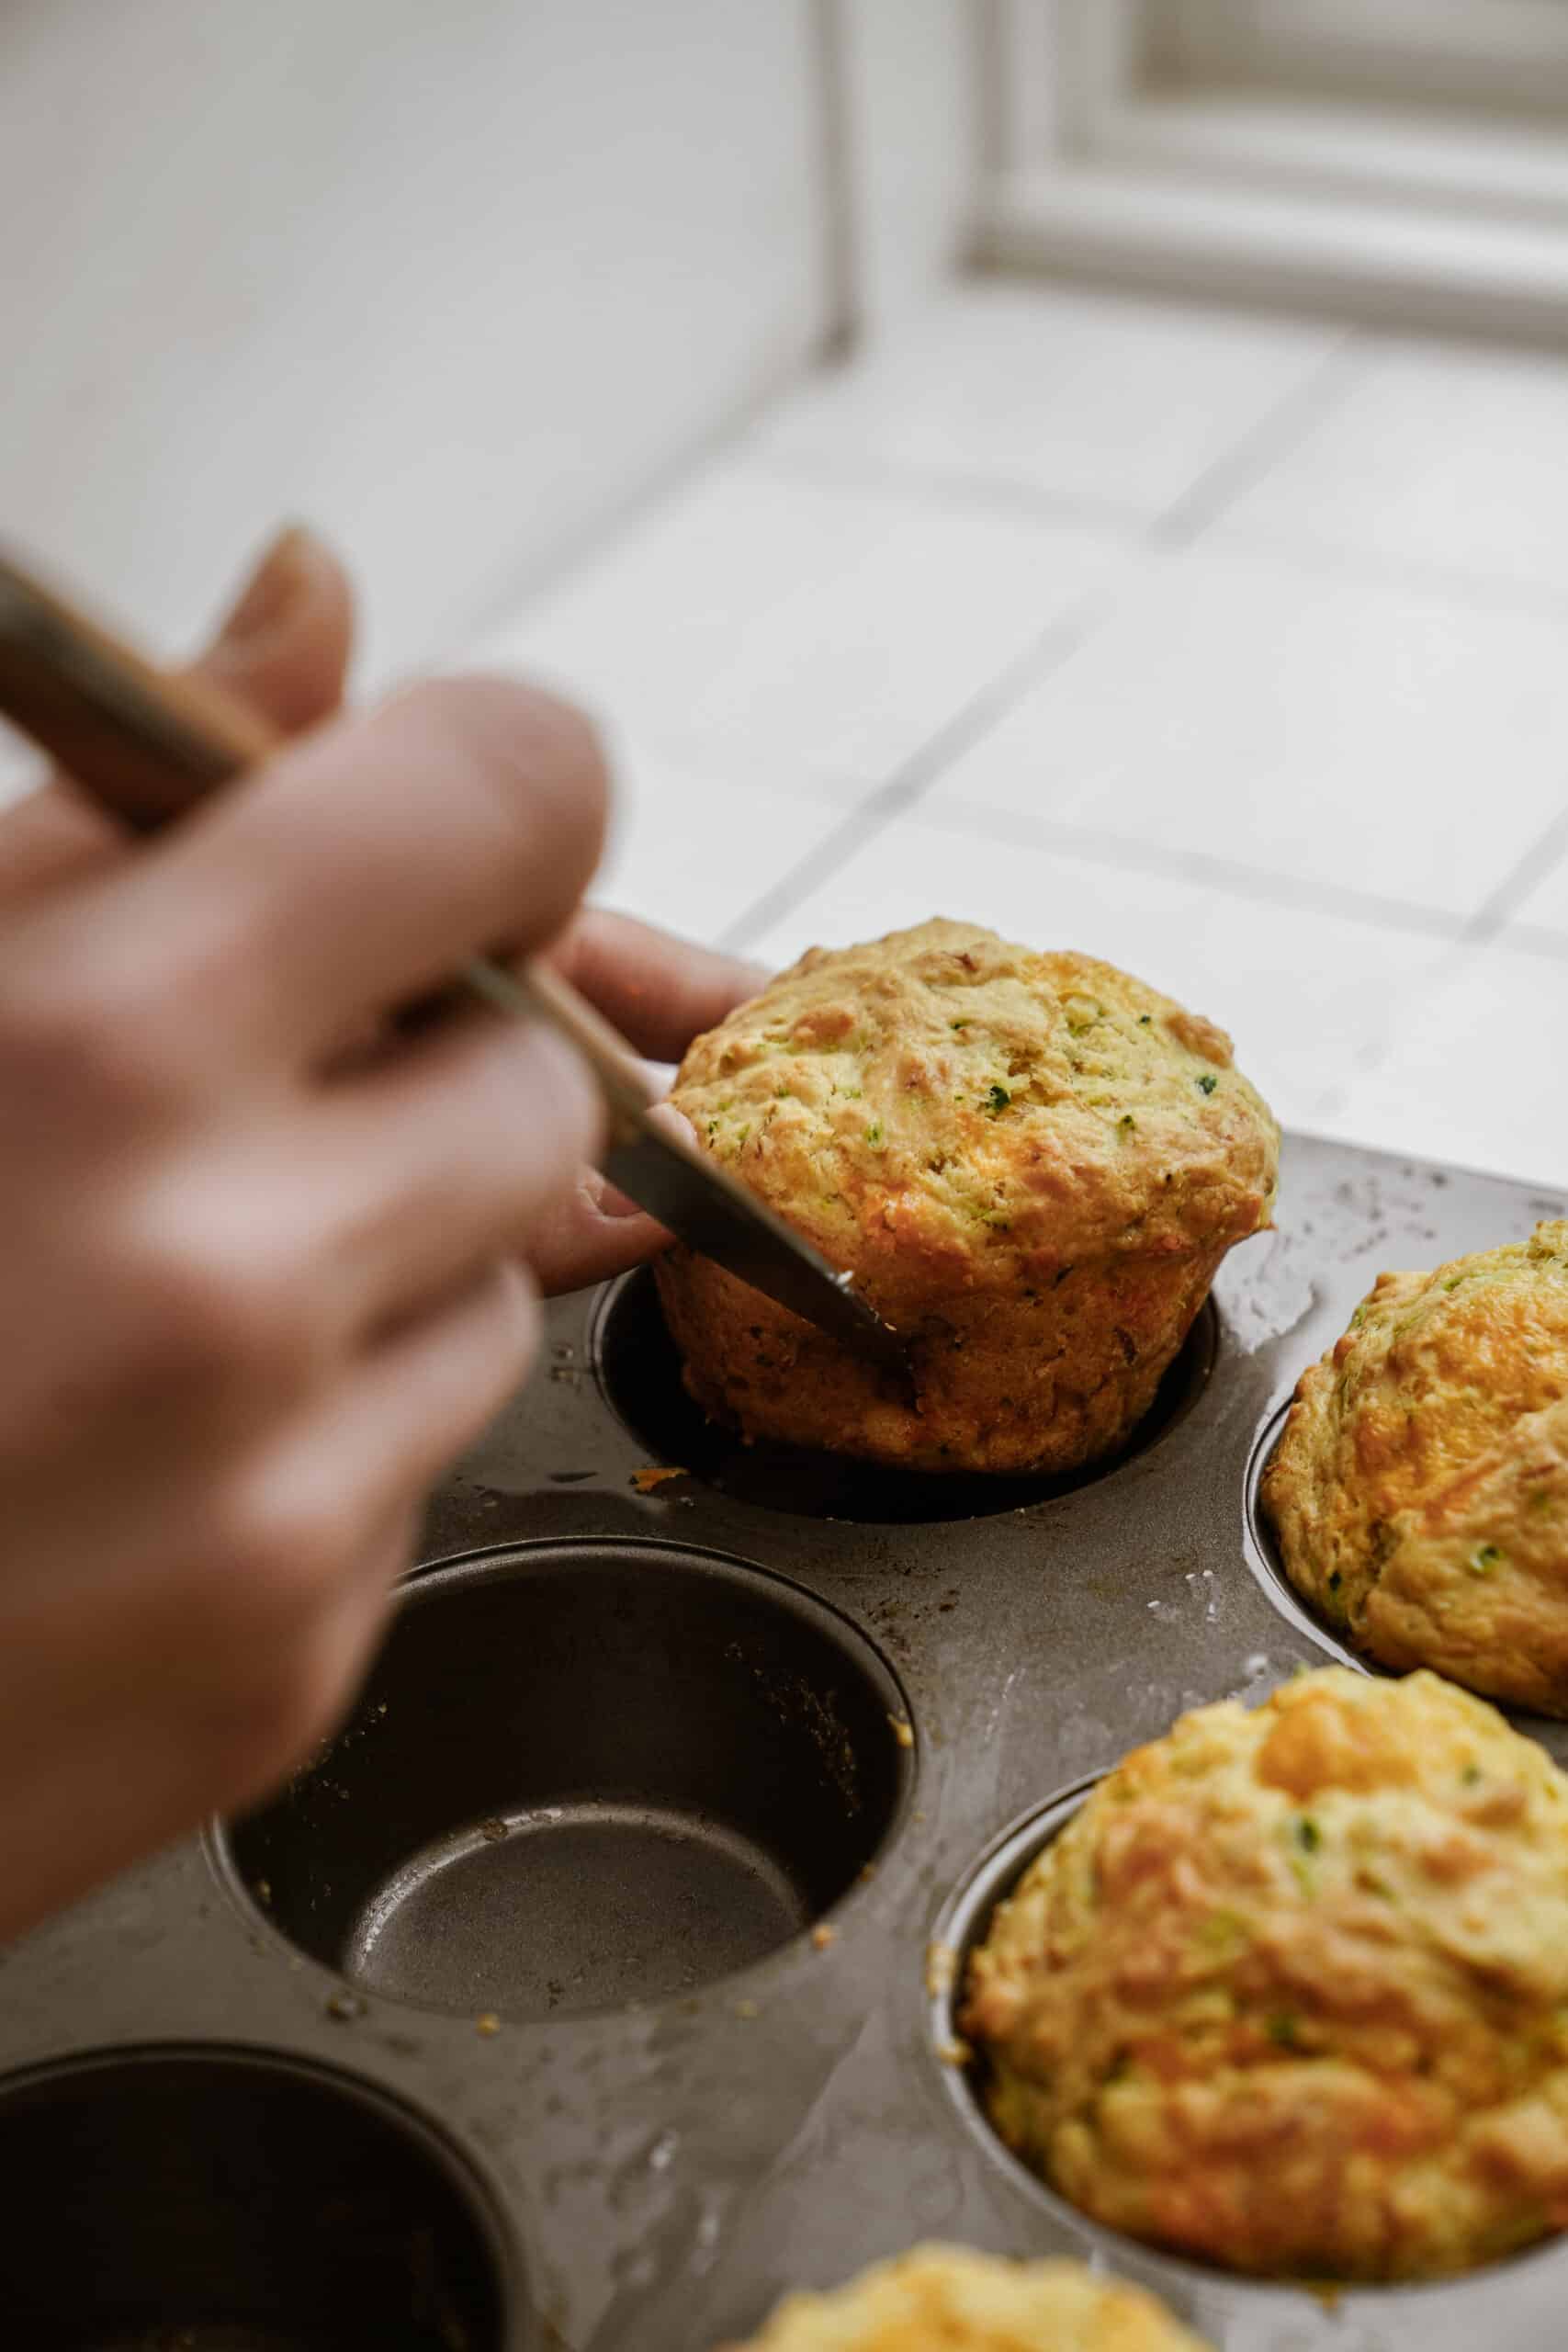 Releasing muffins from muffin tin